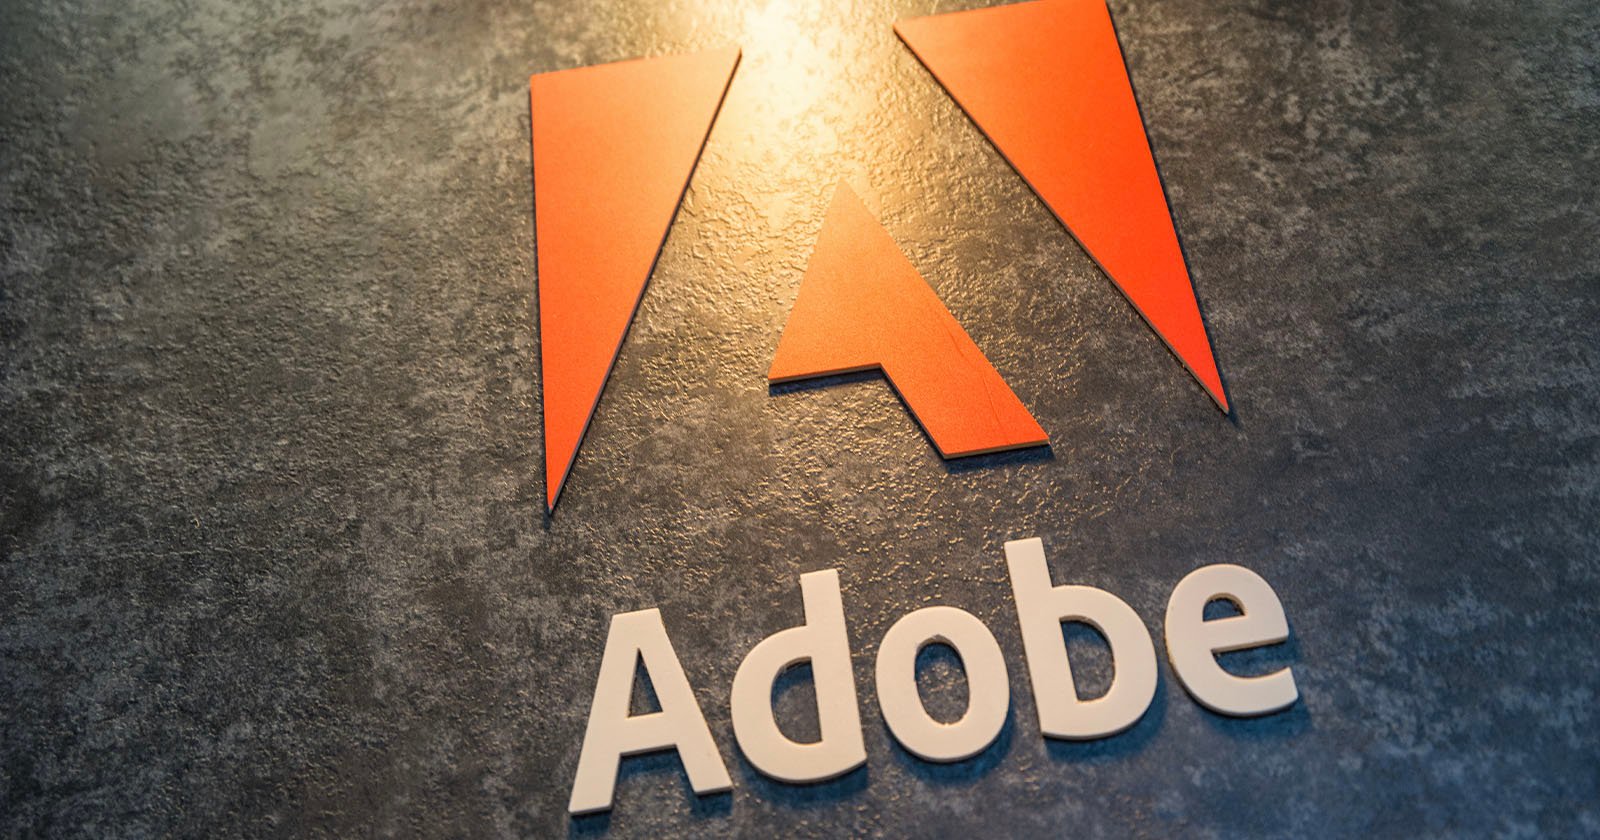 The image shows the Adobe logo, featuring a stylized red "A" on a textured dark surface, with the name "Adobe" written in white capital letters below the logo.